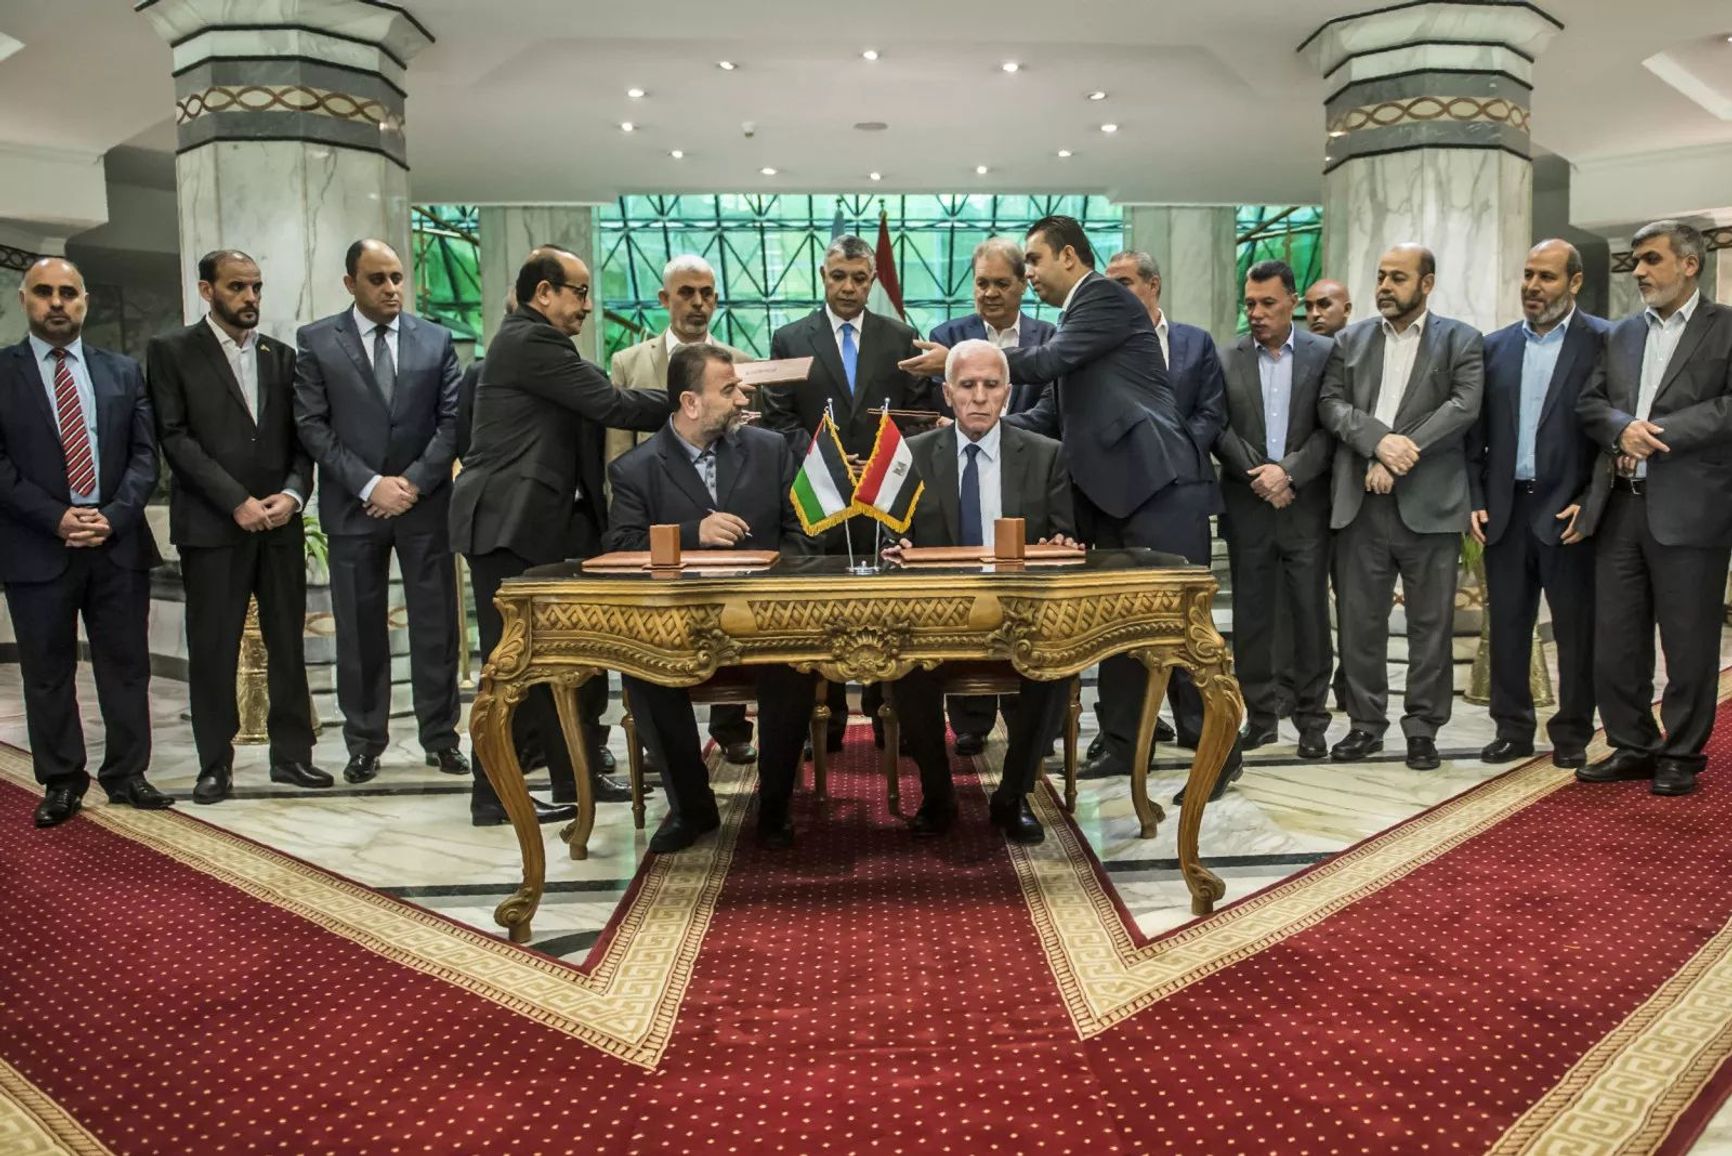 The new deputy leader of Hamas, Salah al-Aruri (sitting on the left), and Azzam al-Ahmad of Fatah (sitting on the right) sign a reconciliation agreement, Cairo, October 12, 2017.